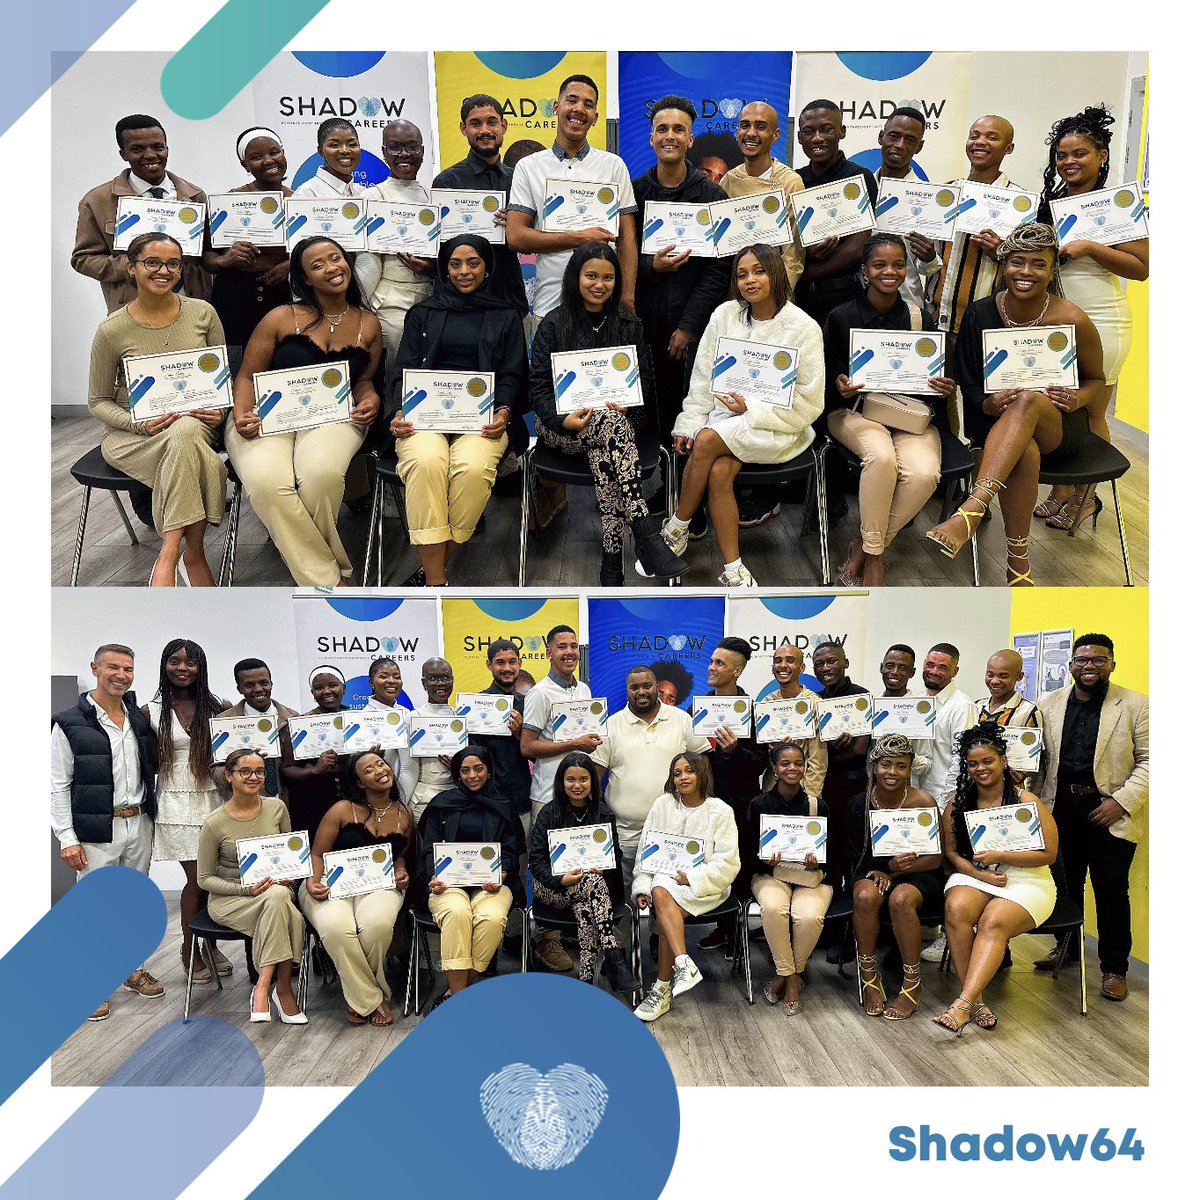 Celebrating the graduation of our 64th class of Shadow Careers students! Our hearts go with them as they embark on their permanent careers at Sigma Connected and we are excited to see them succeed and thrive.  #JobCreation #Youth #Careers #Innovation #BPO #GBS #SouthAfrica